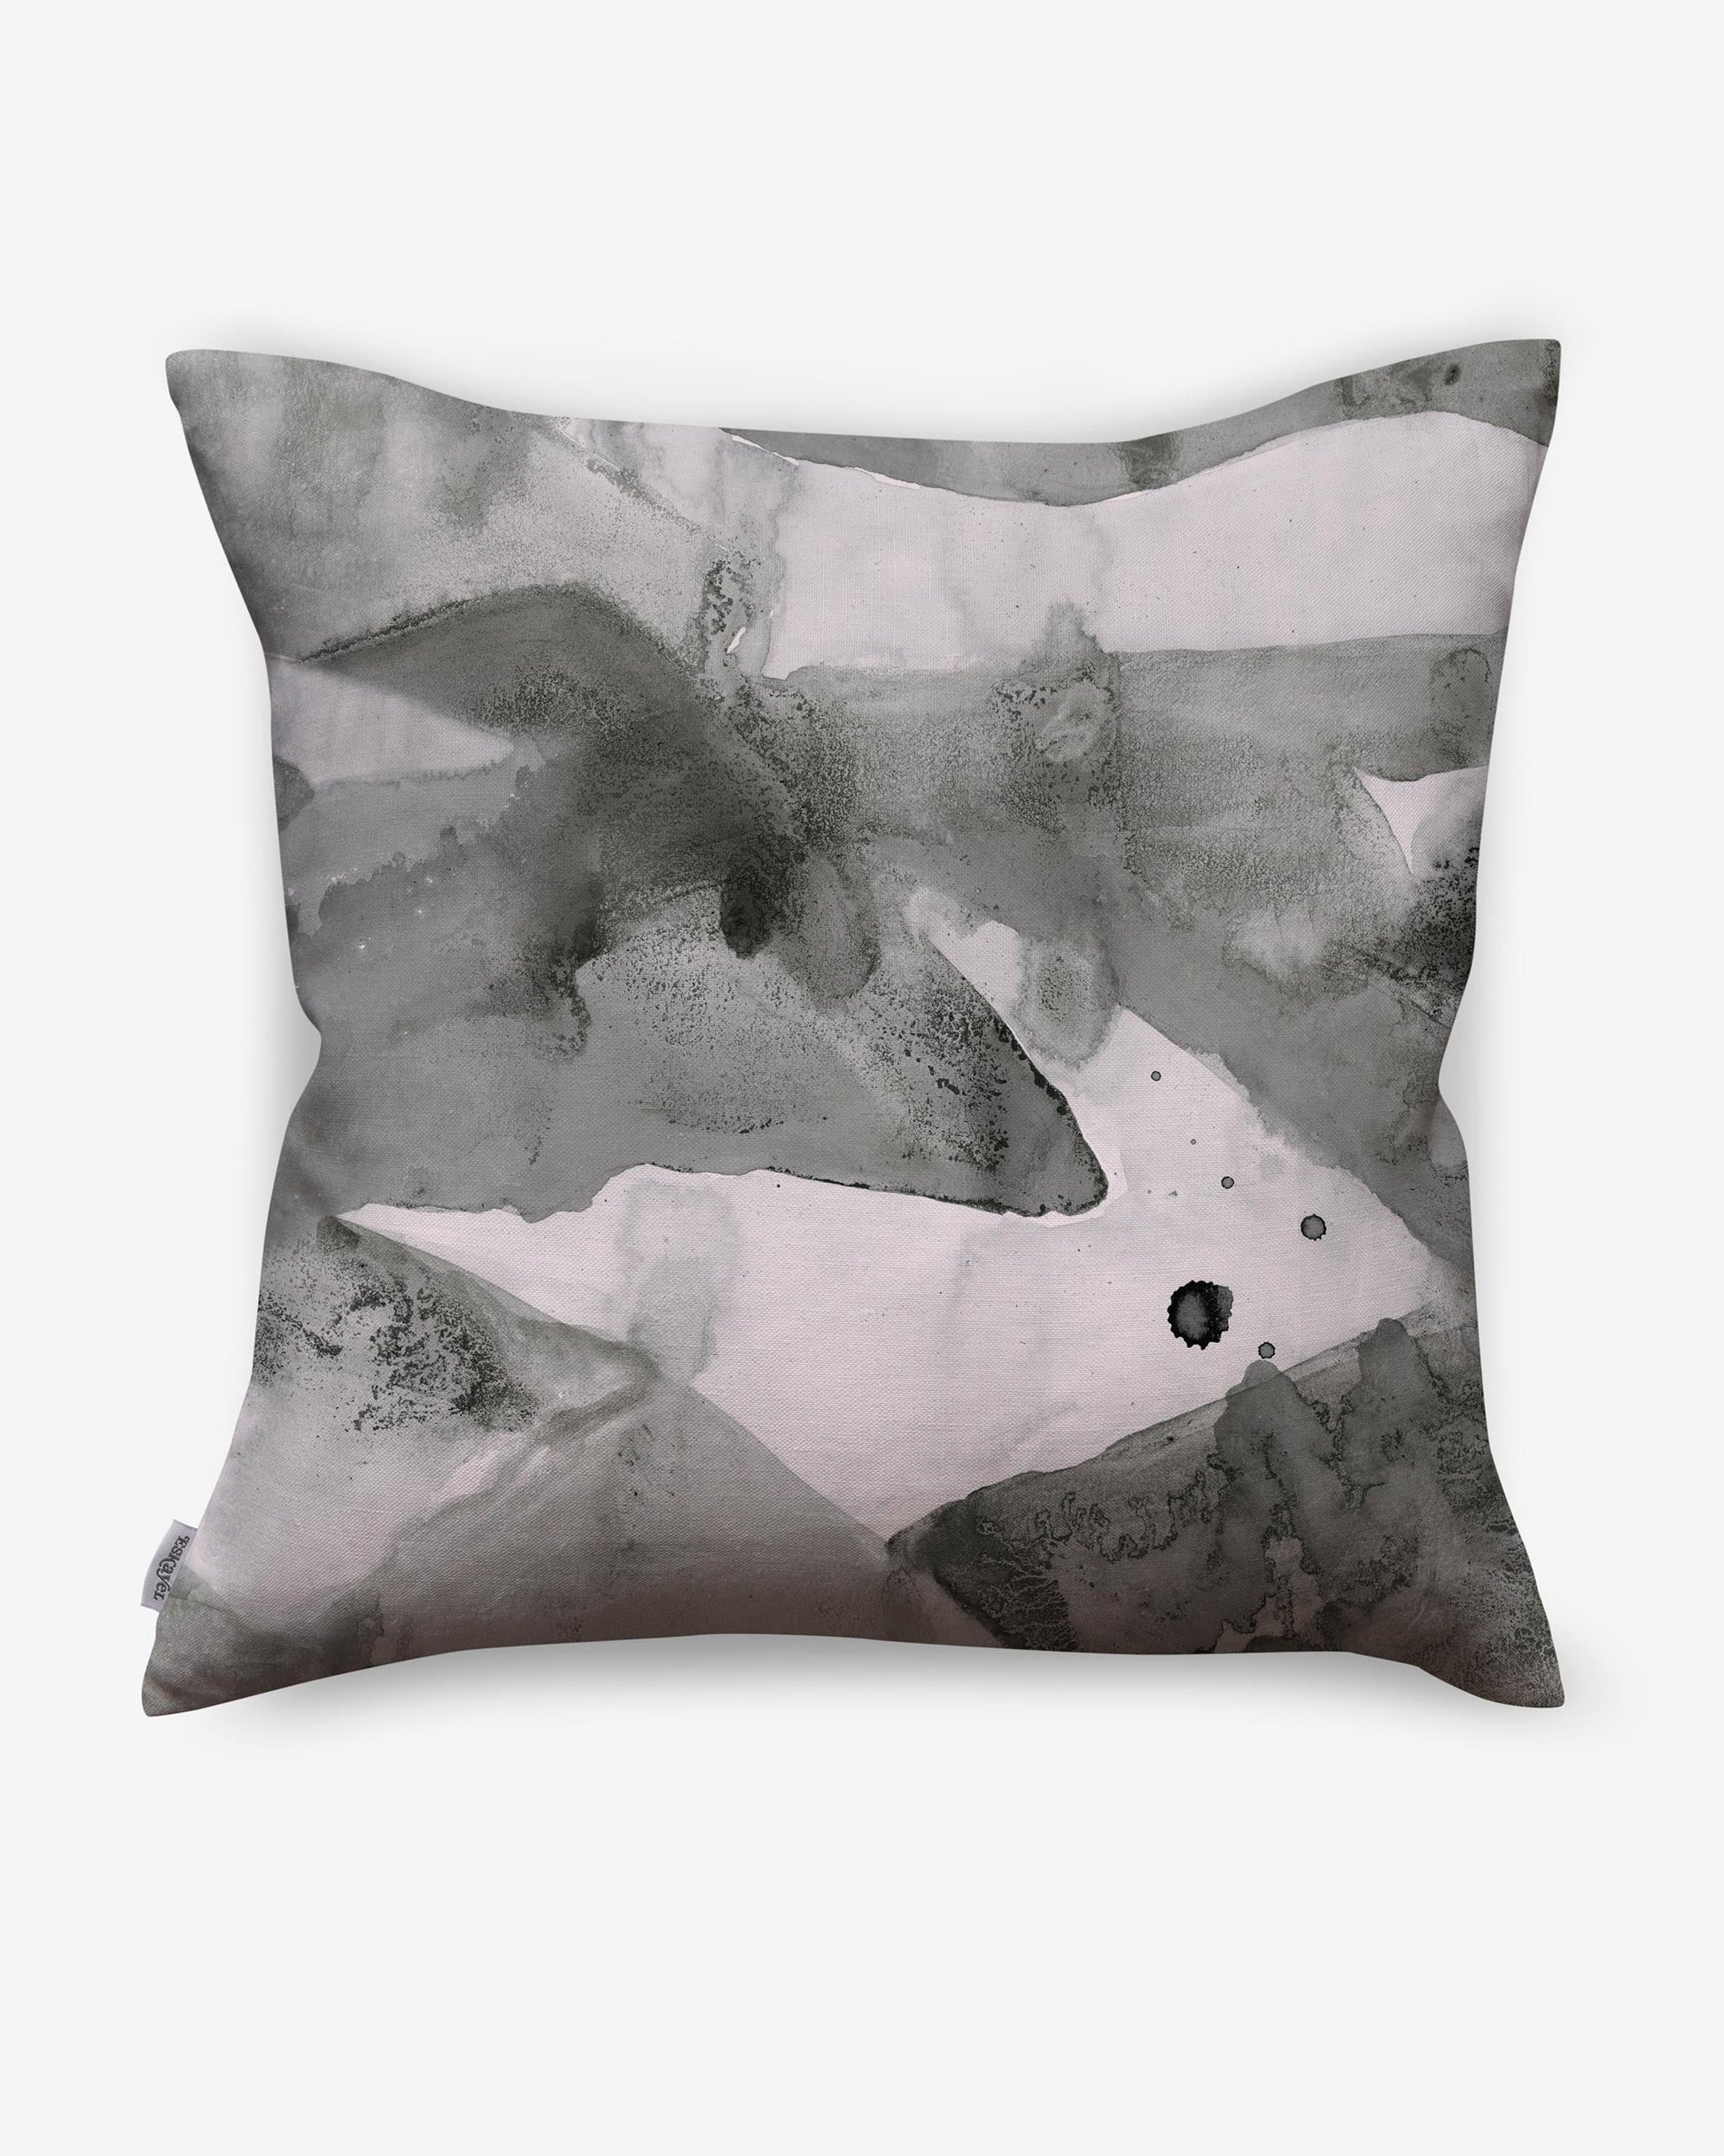 A Mani Pillow Phyllite with a painting on it